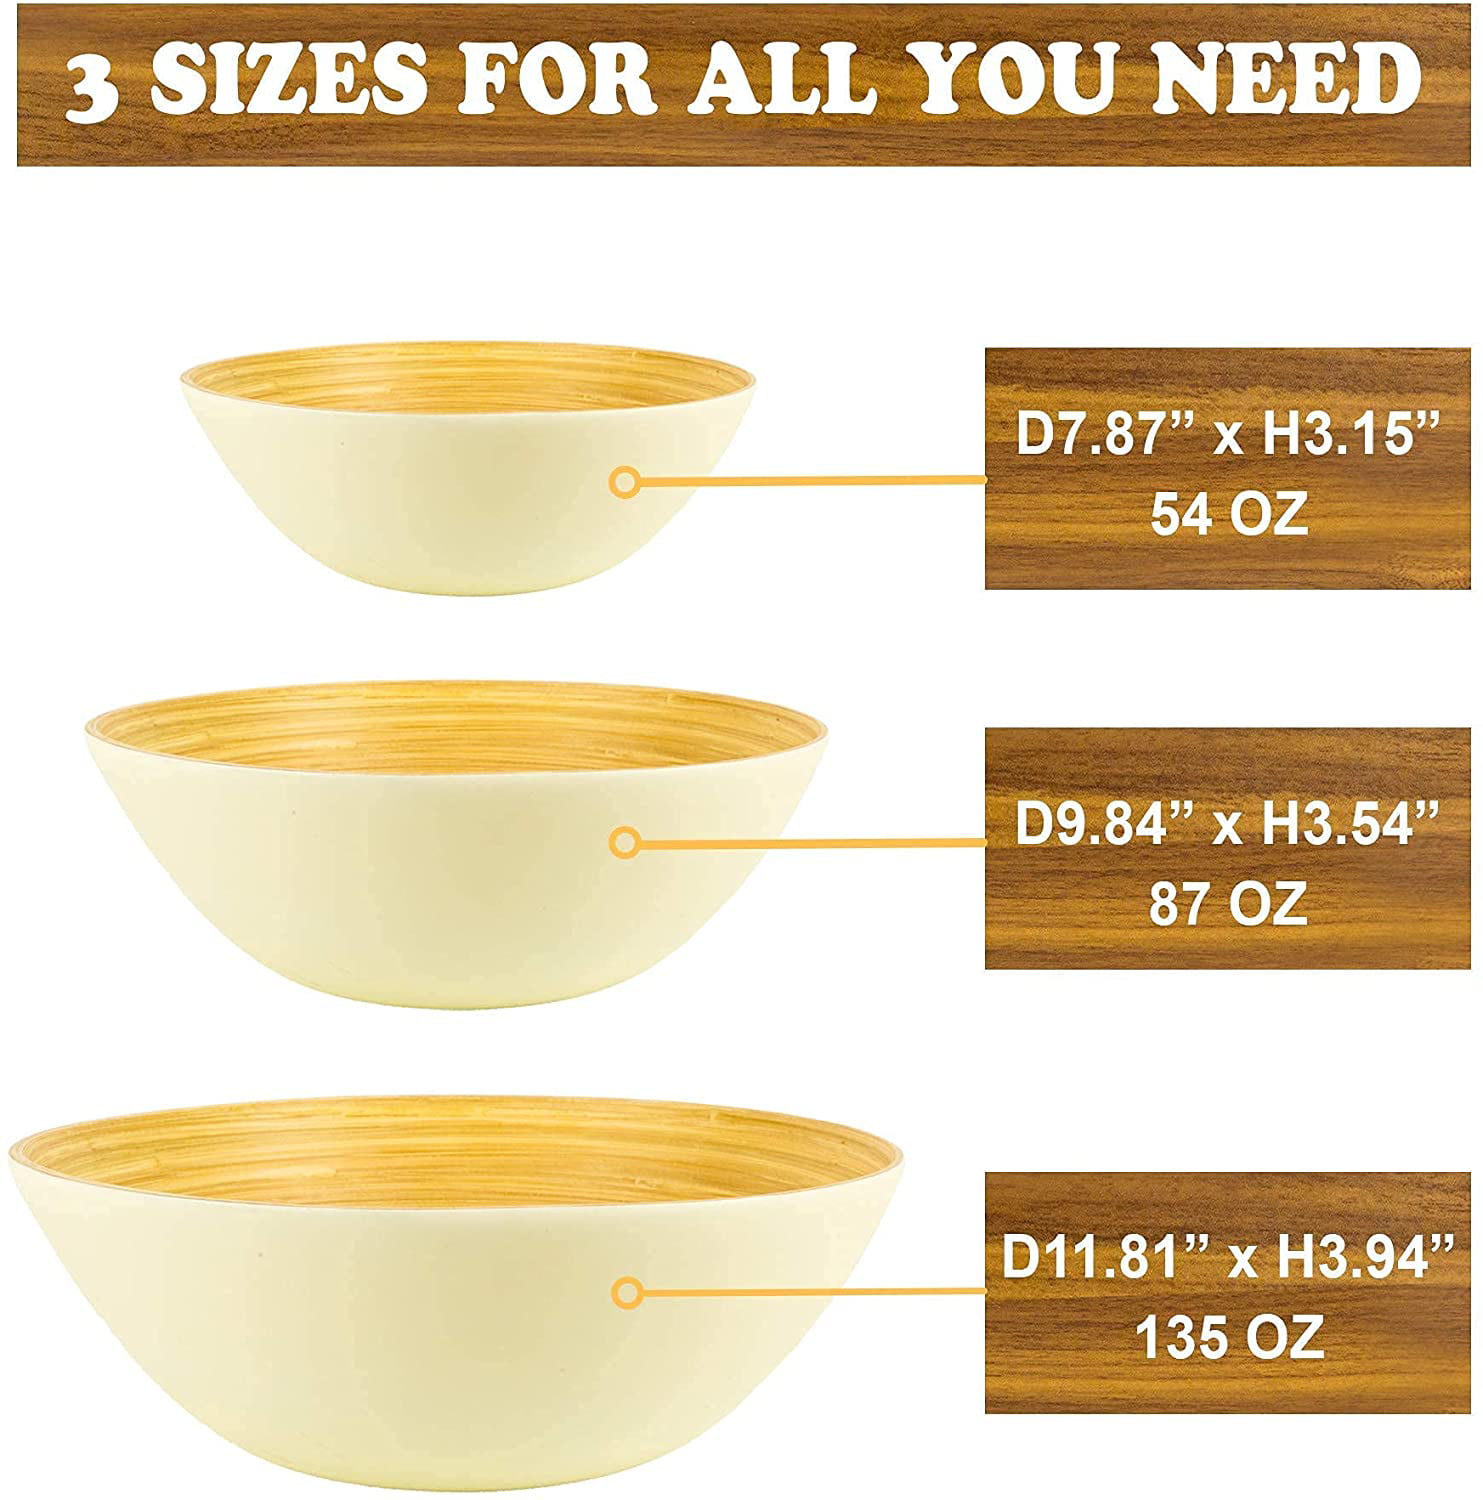 Matte Bamboo Natural Bamboo Large Salad Bowls Serving Bowl Sizes 54-81-114 OZ Small to Big Respectively for Serving Salad Pasta Fruit Chip Nut Cereal Bamboo Dinnerware Sets for Eating Decor Kid Bowl